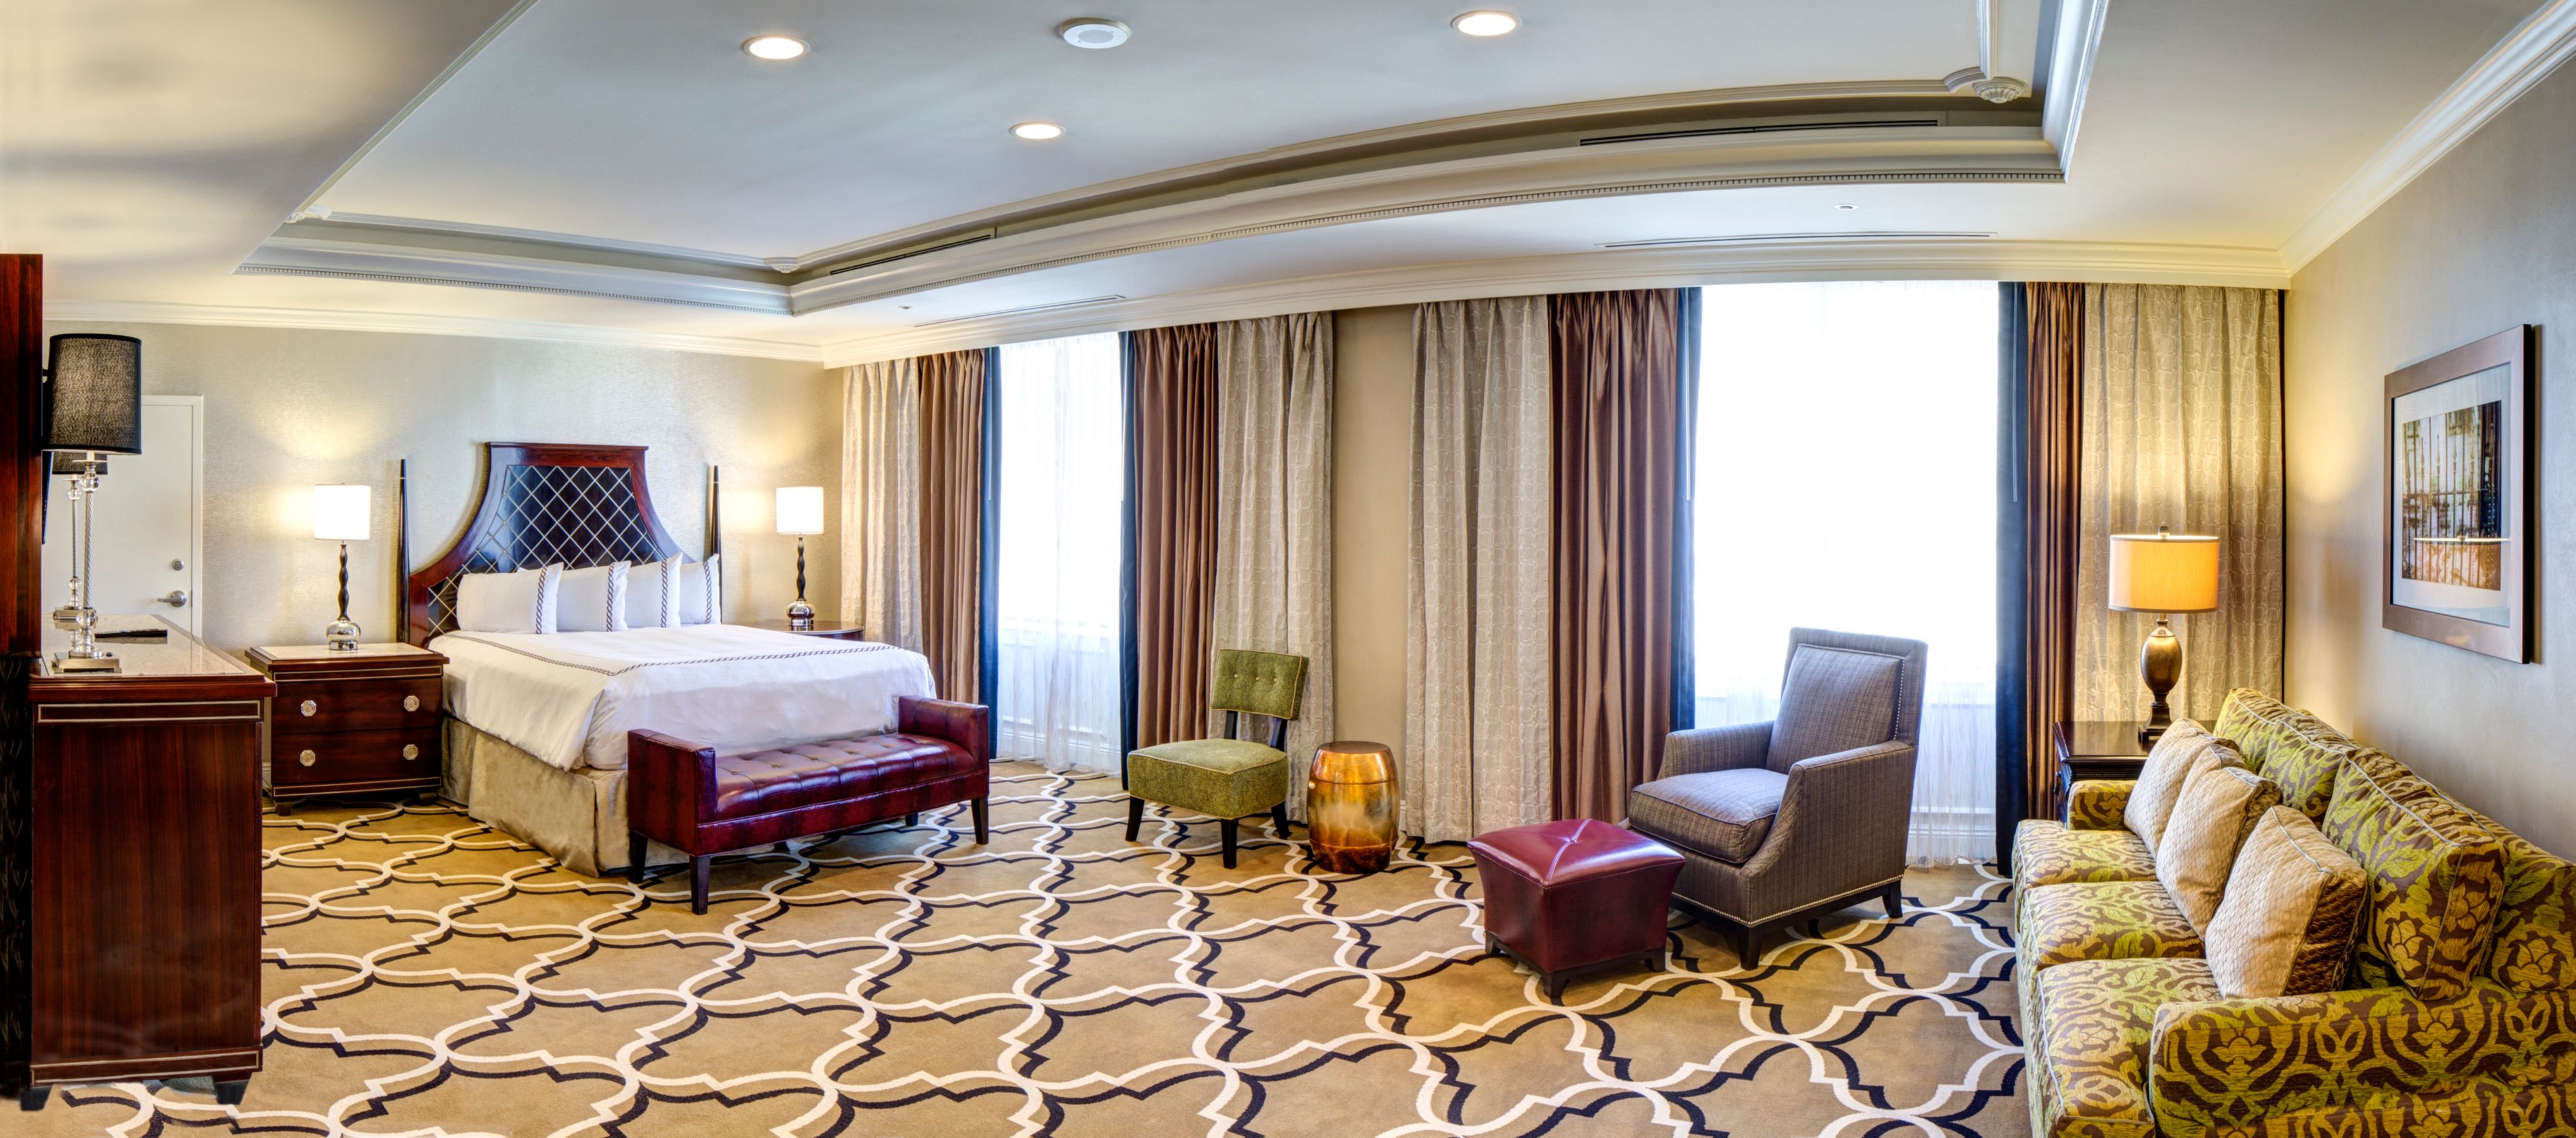 Pet Friendly InterContinental New Orleans in New Orleans, Louisiana